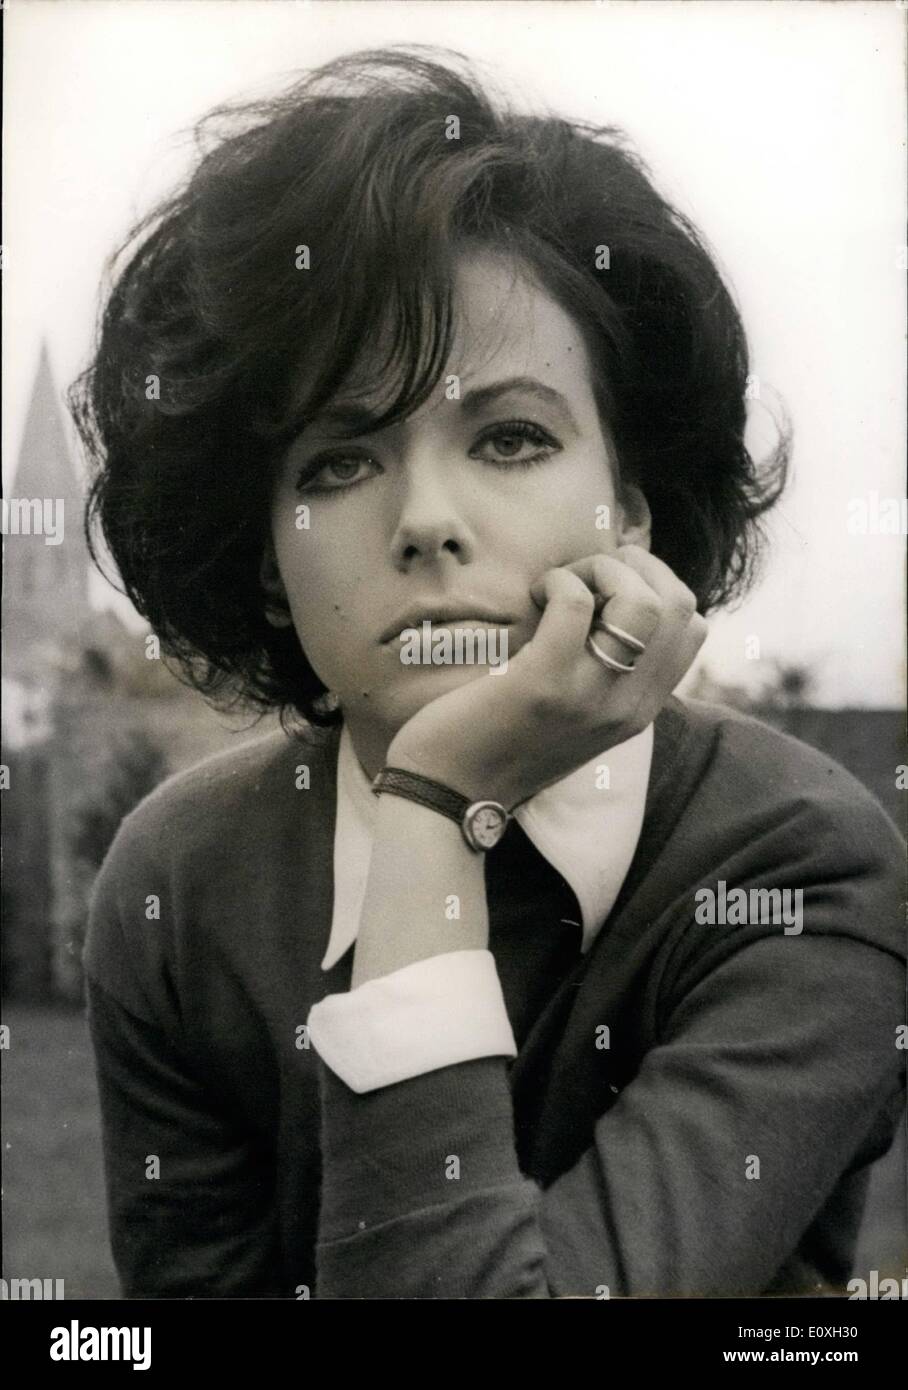 Oct. 10, 1966 - Italian actress stars in French film: 22-year-old Italian actress Marilu Tolo co-stars with Patricia Viternbo in a spy fim ''Judoka Agent Secret'' now in the making in Paris. Photo shows close-up of Marilu Tolo. Stock Photo